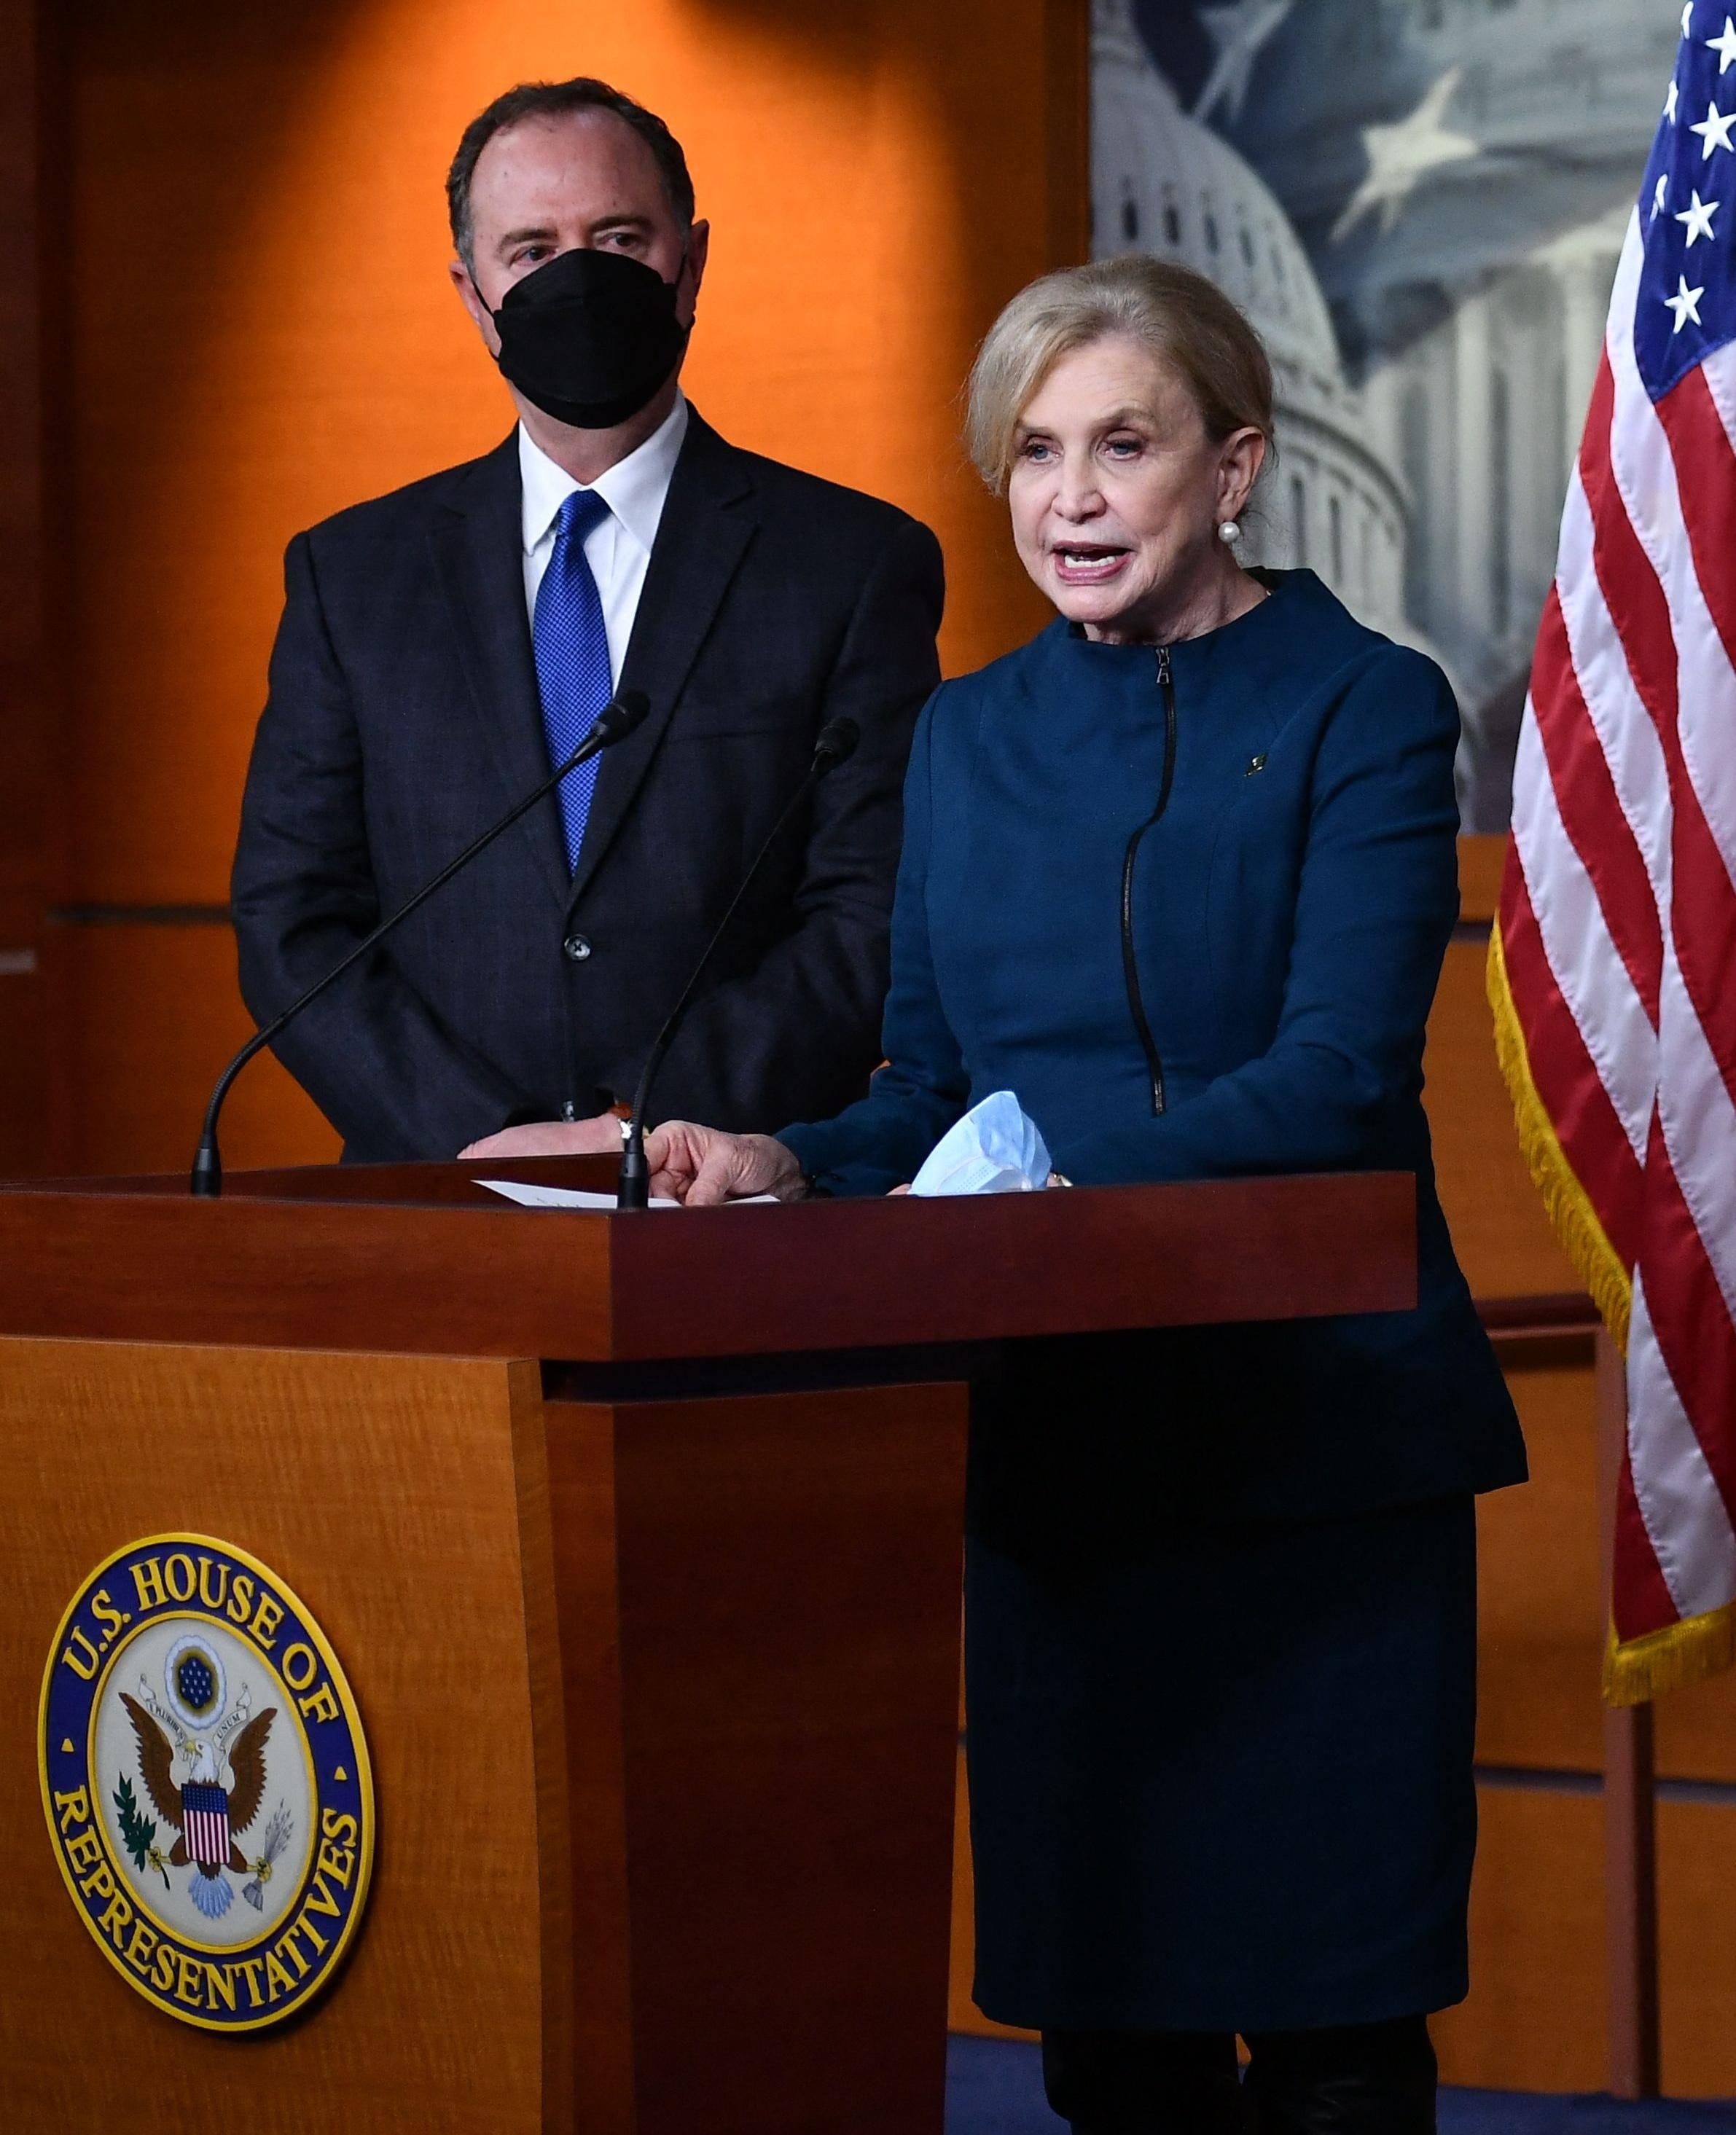 Rep. Carolyn Maloney (D-N.Y.) speaks and Rep. Adam Schiff (D-Calif.) listens during a press conference in Washington, D.C. on December 9, 2021.